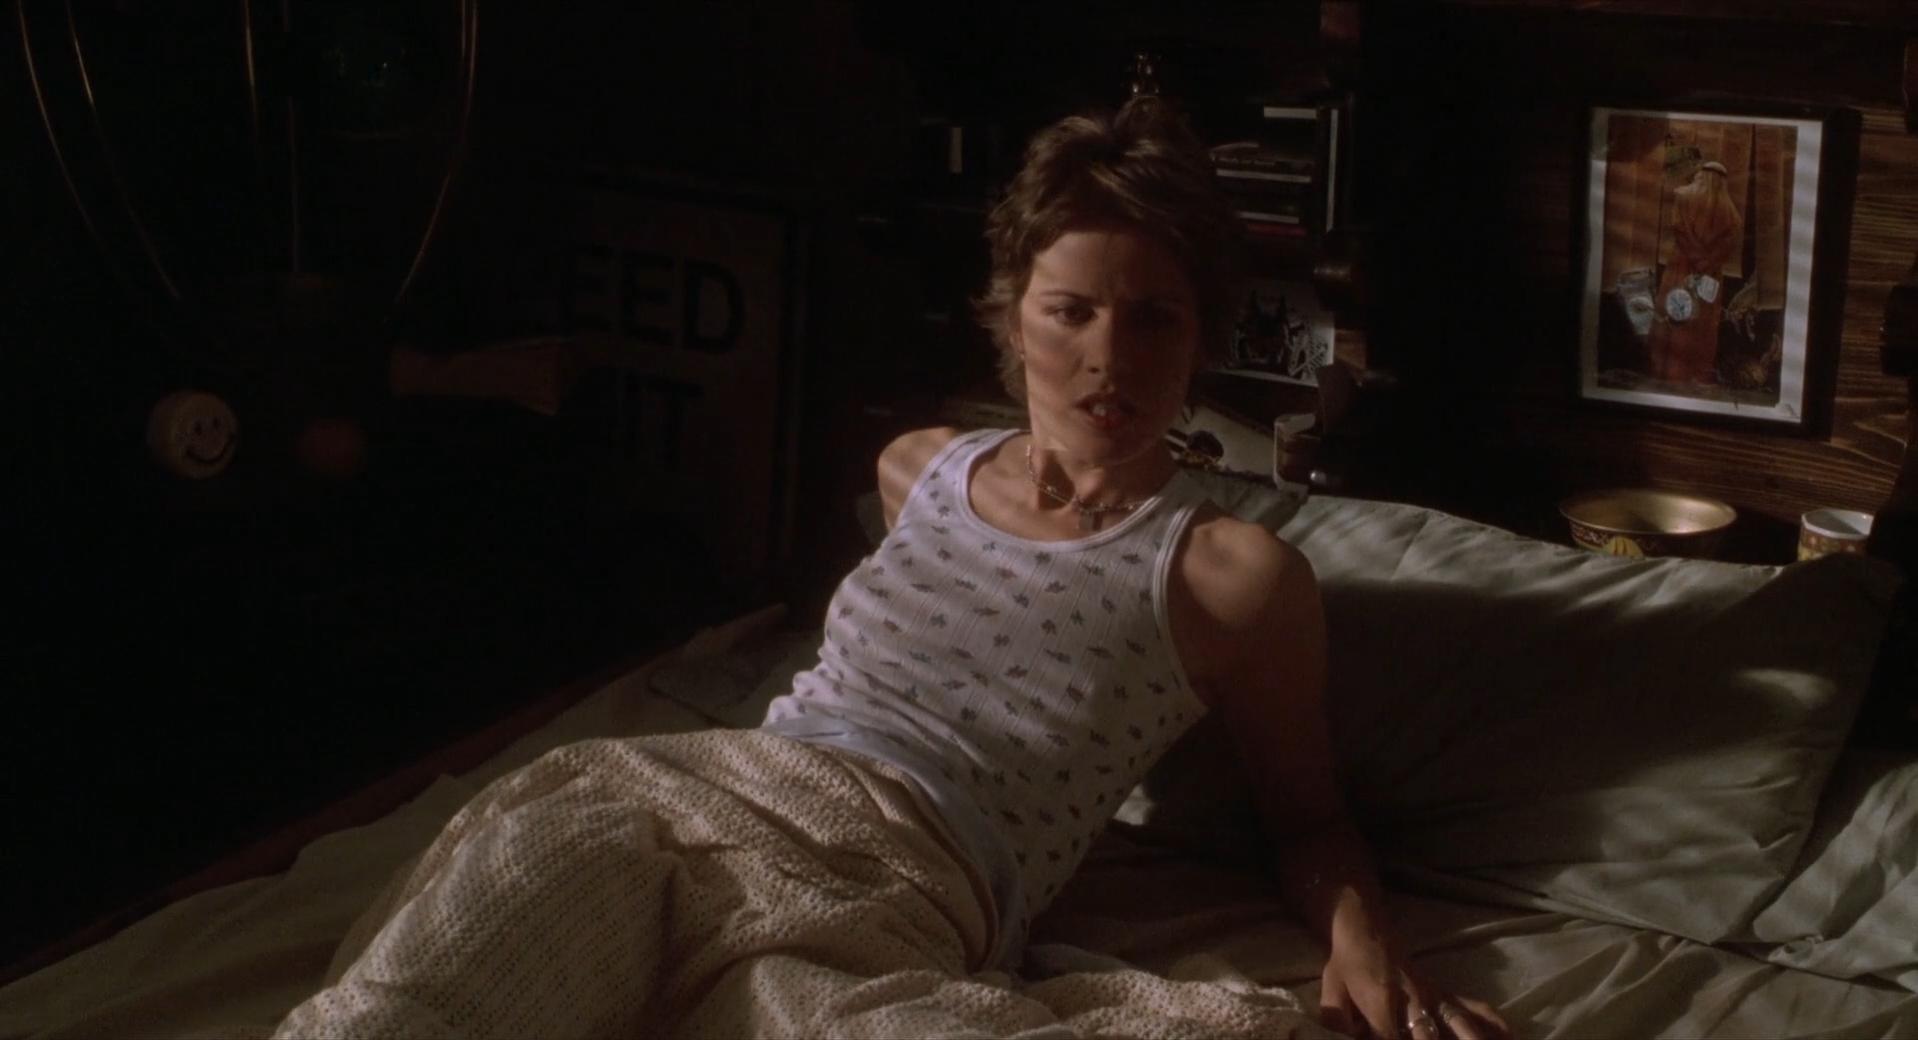 Kim Dickens nude - Truth or Consequences N.M. (1997)